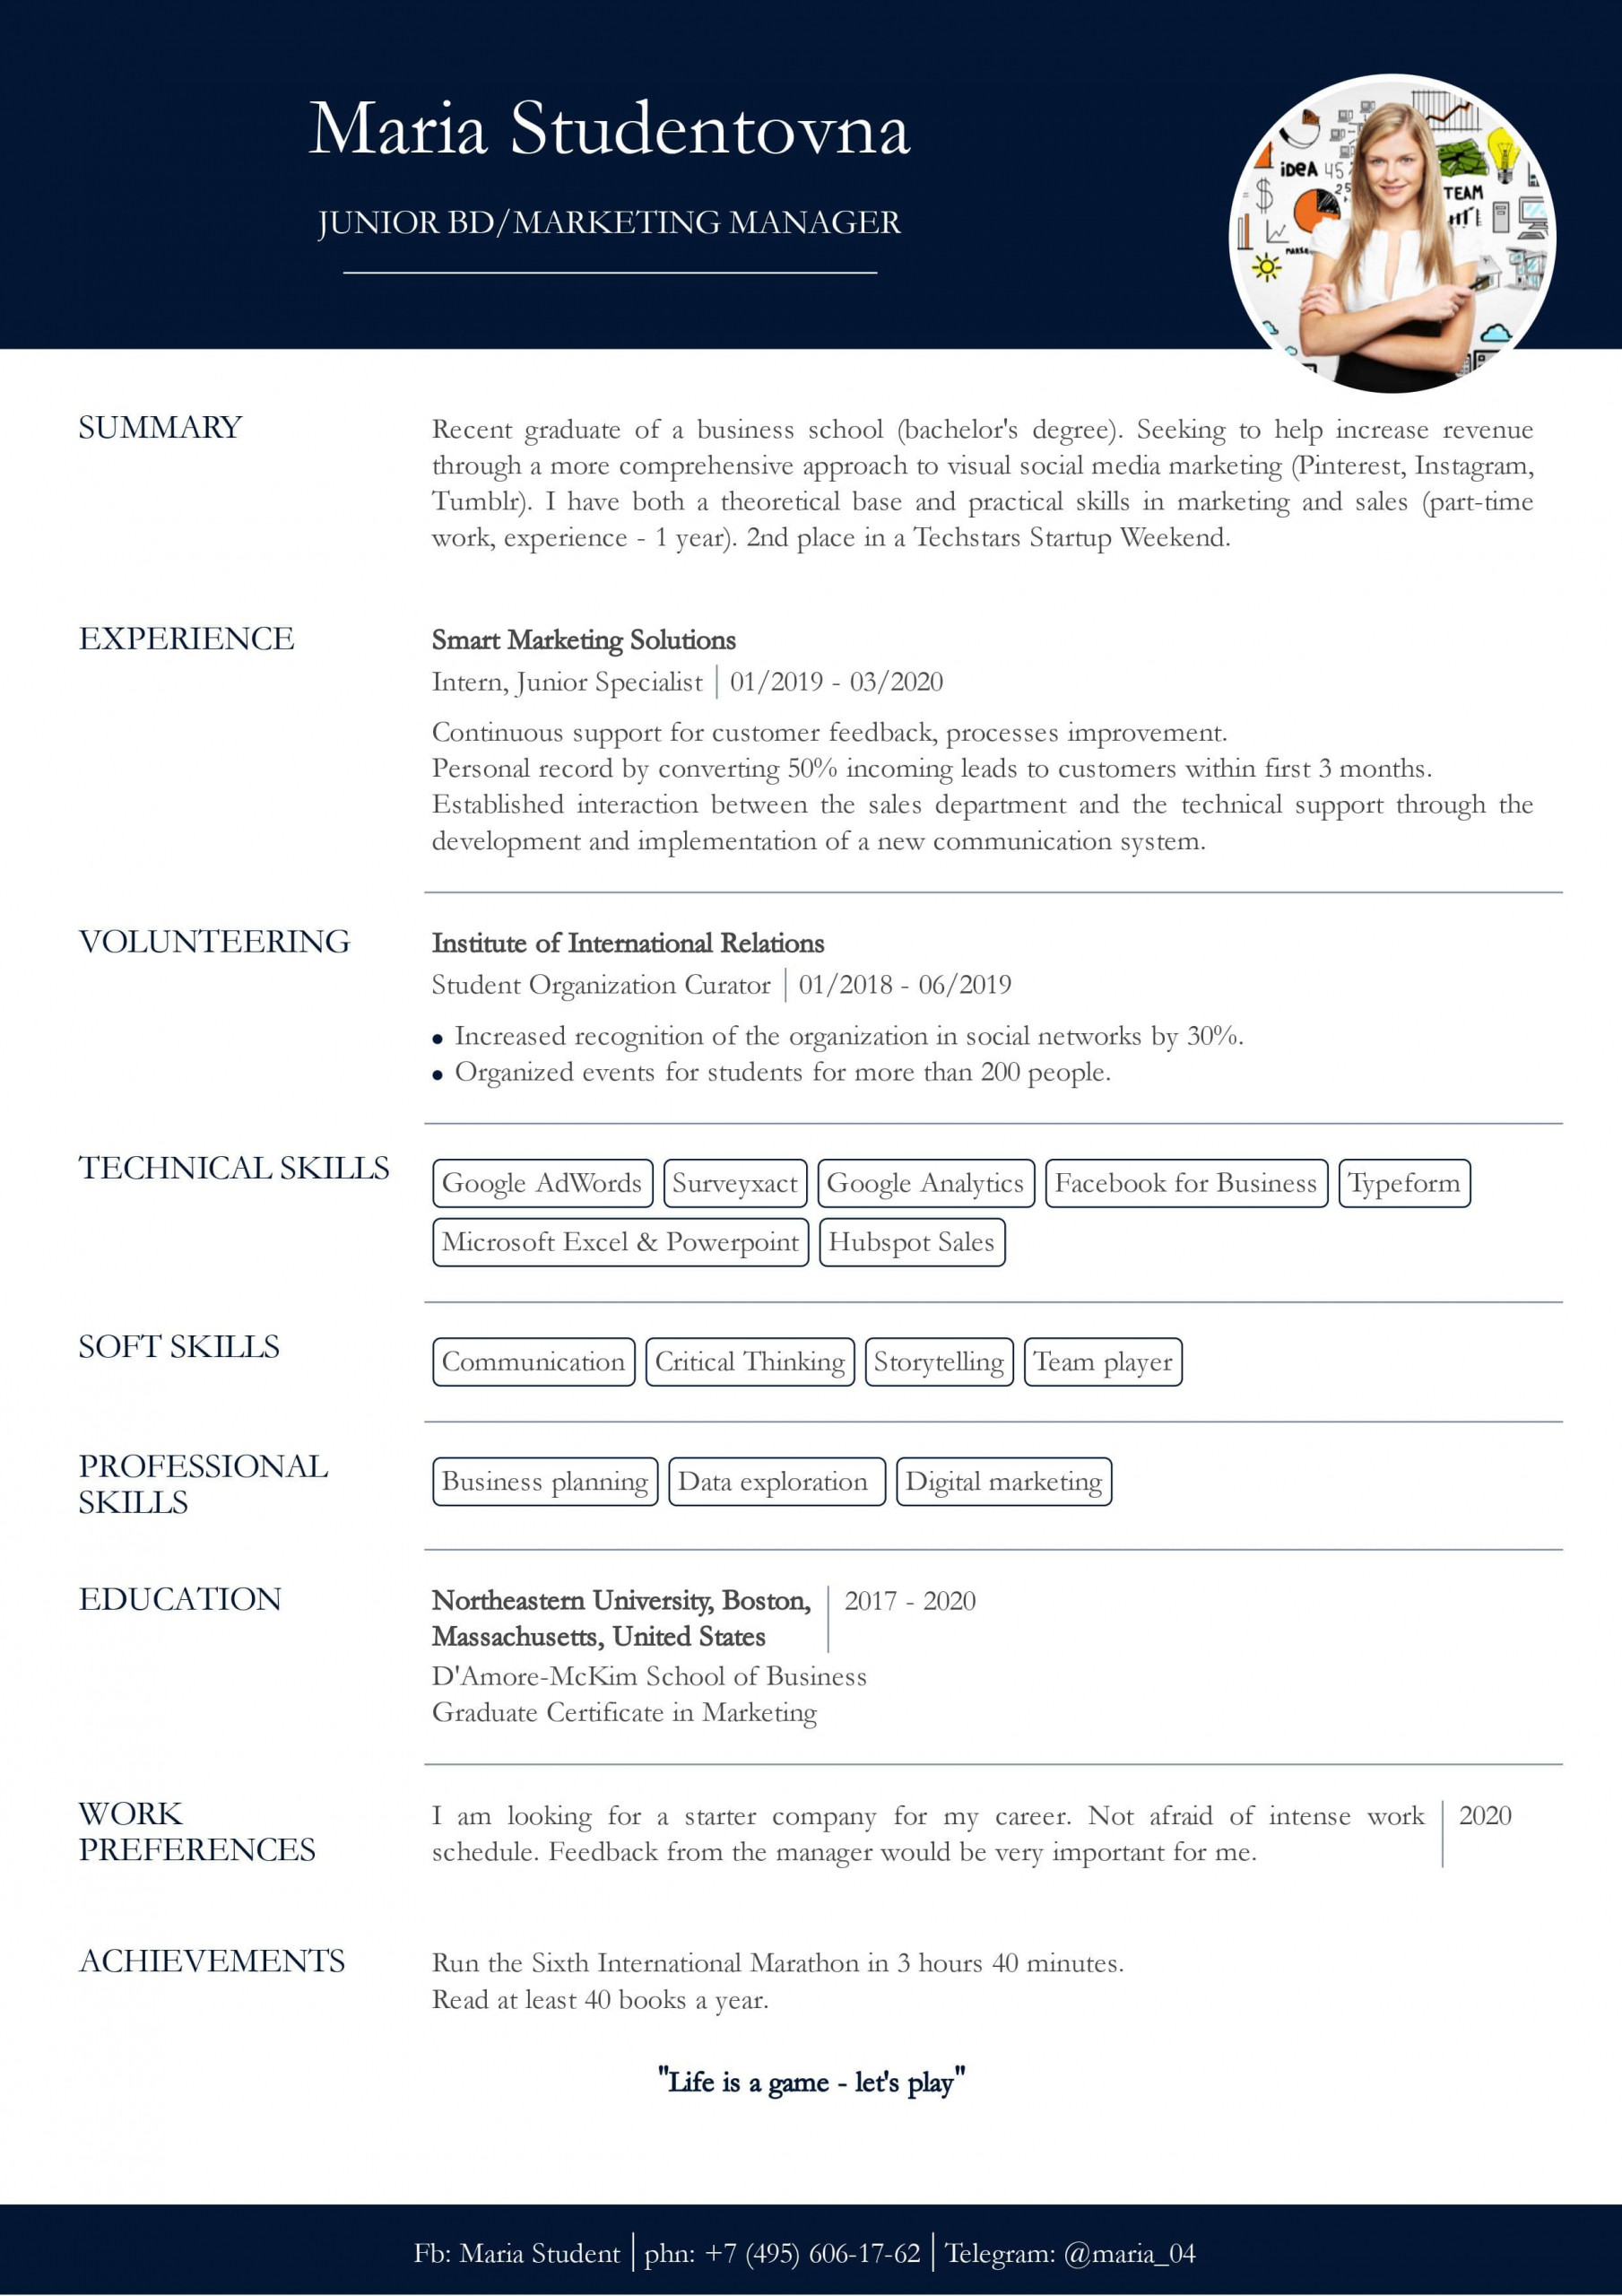 Free Resume Templates for Students with No Work Experience Resume with No Work Experience. Sample for Students. – Cv2you Blog